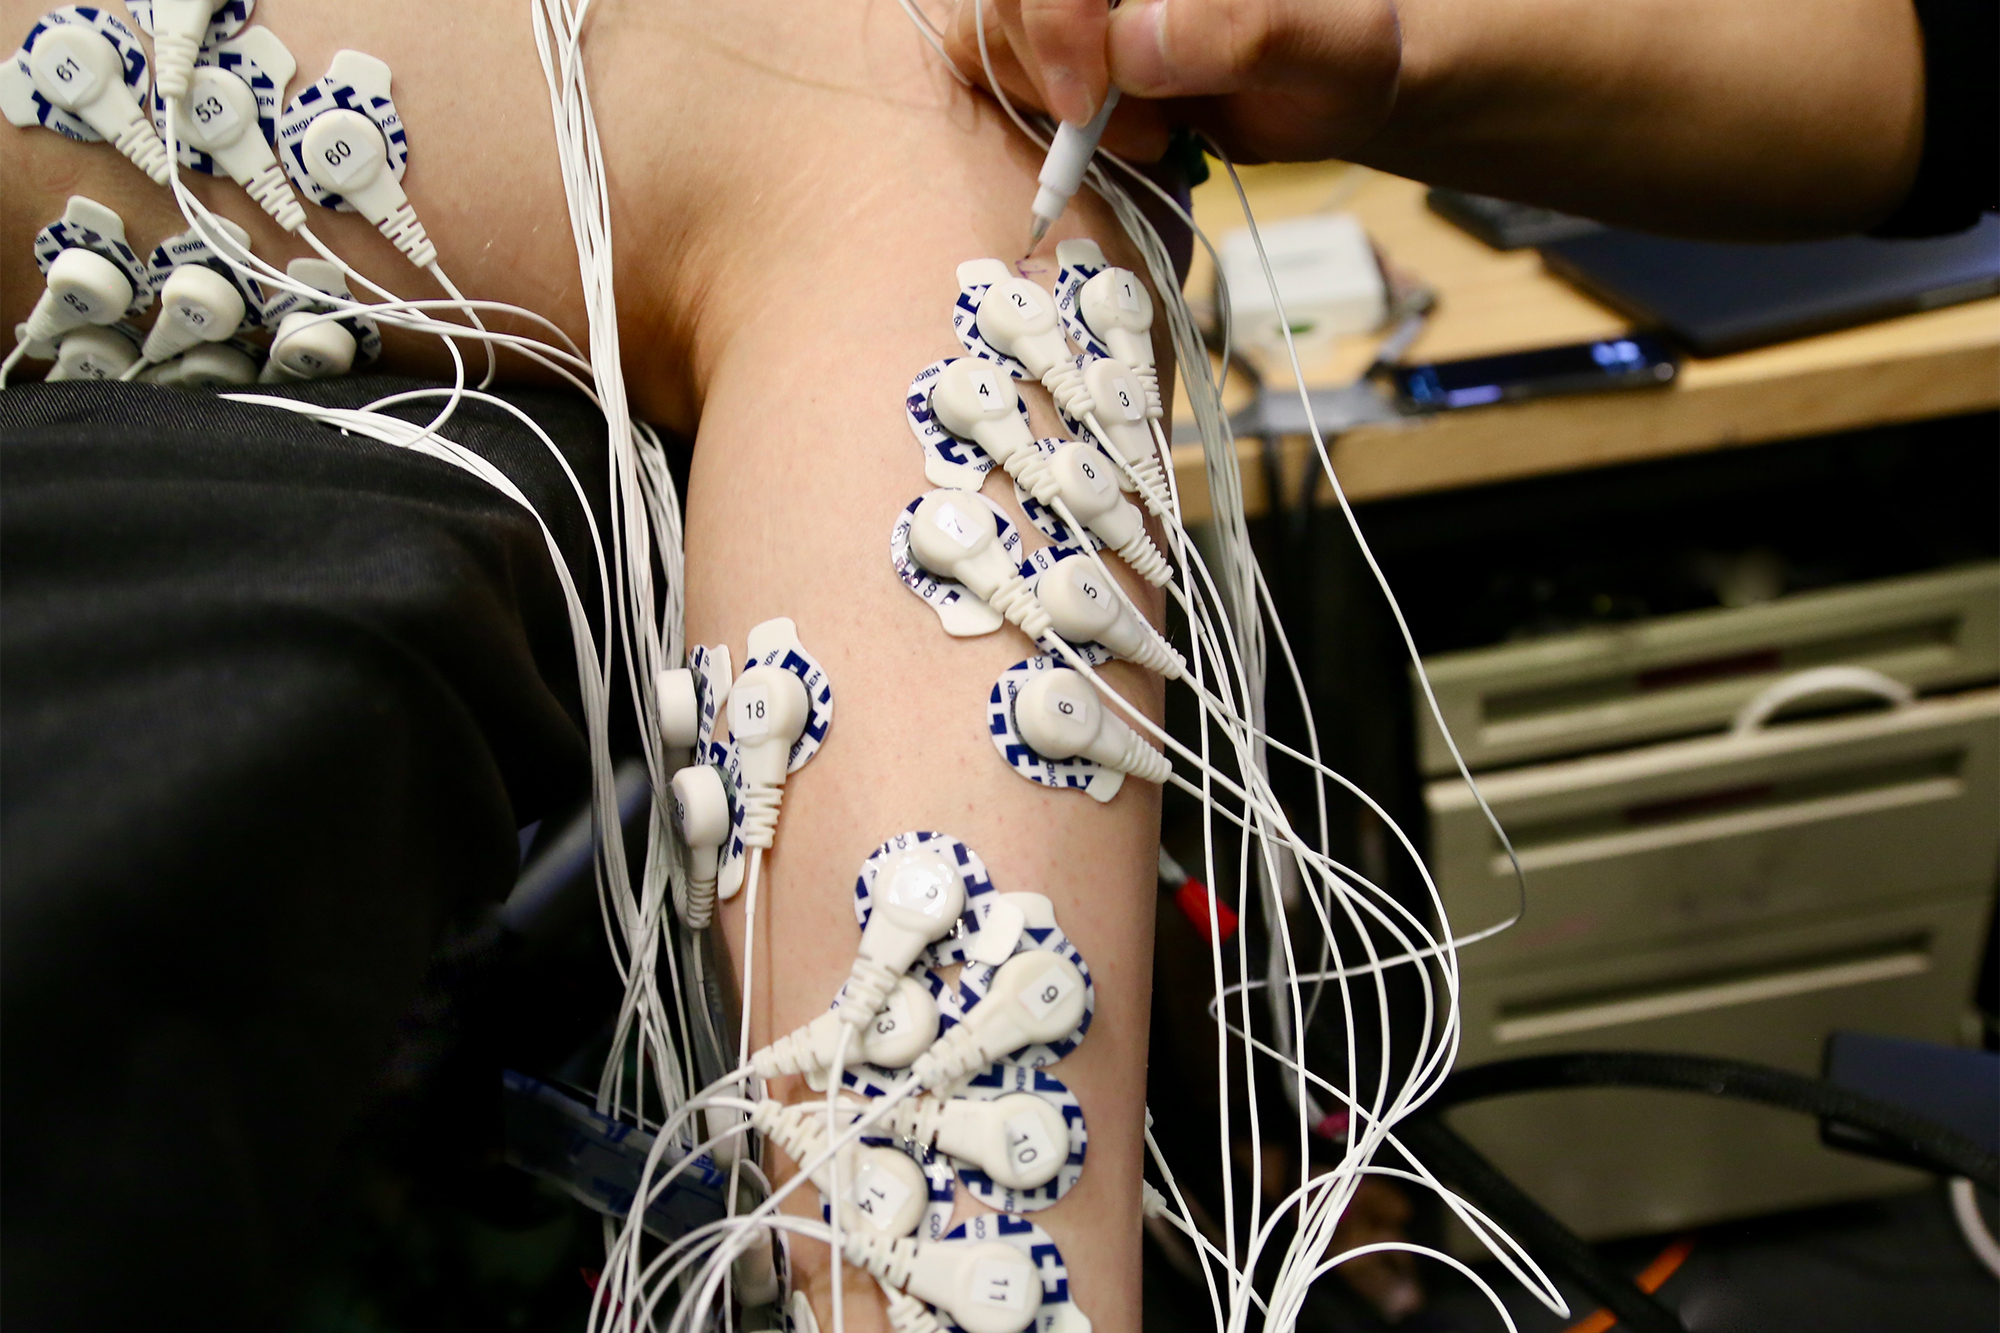 New surgery may allow better control of prosthetic limbs  MIT news